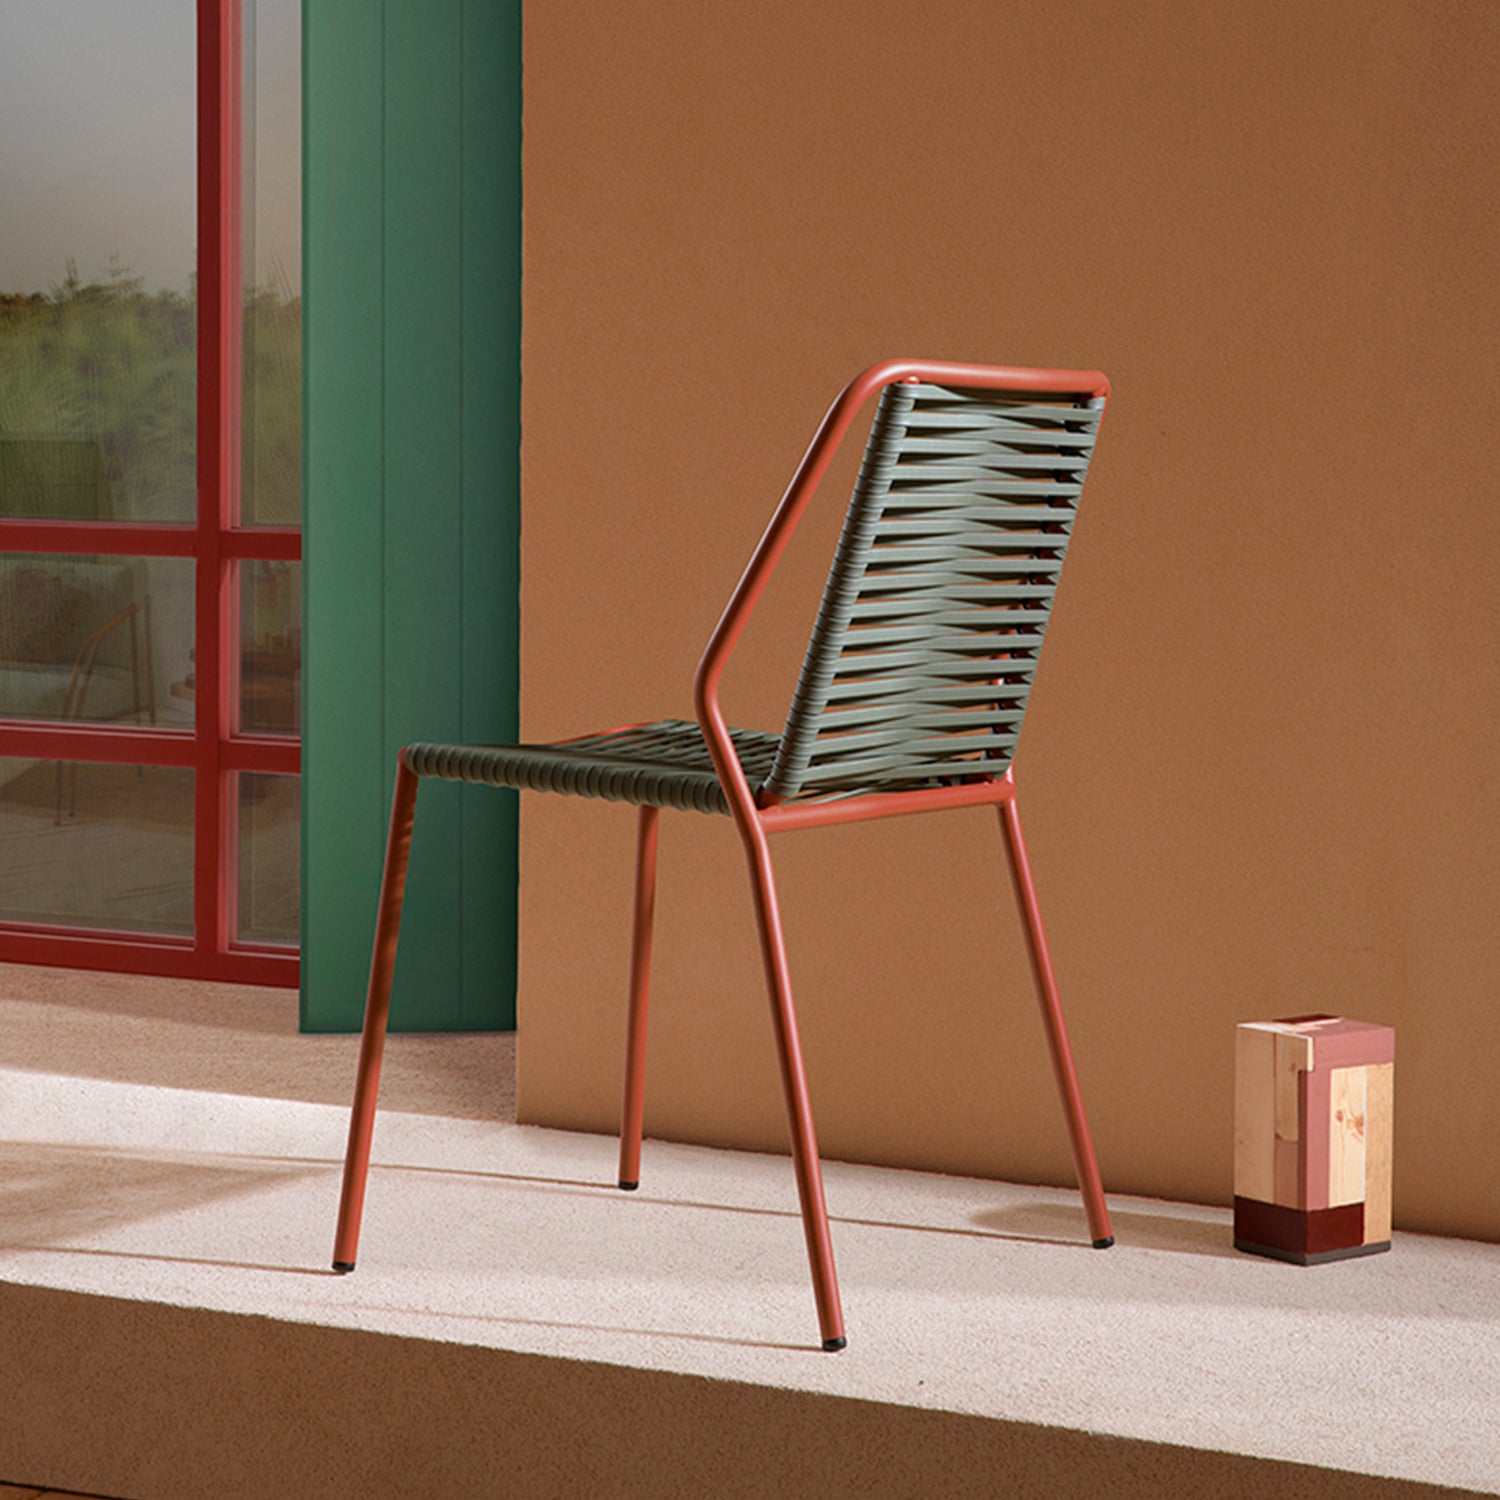 Pedrali Philia 3900 Outdoor Dining Chair in terracotta and green